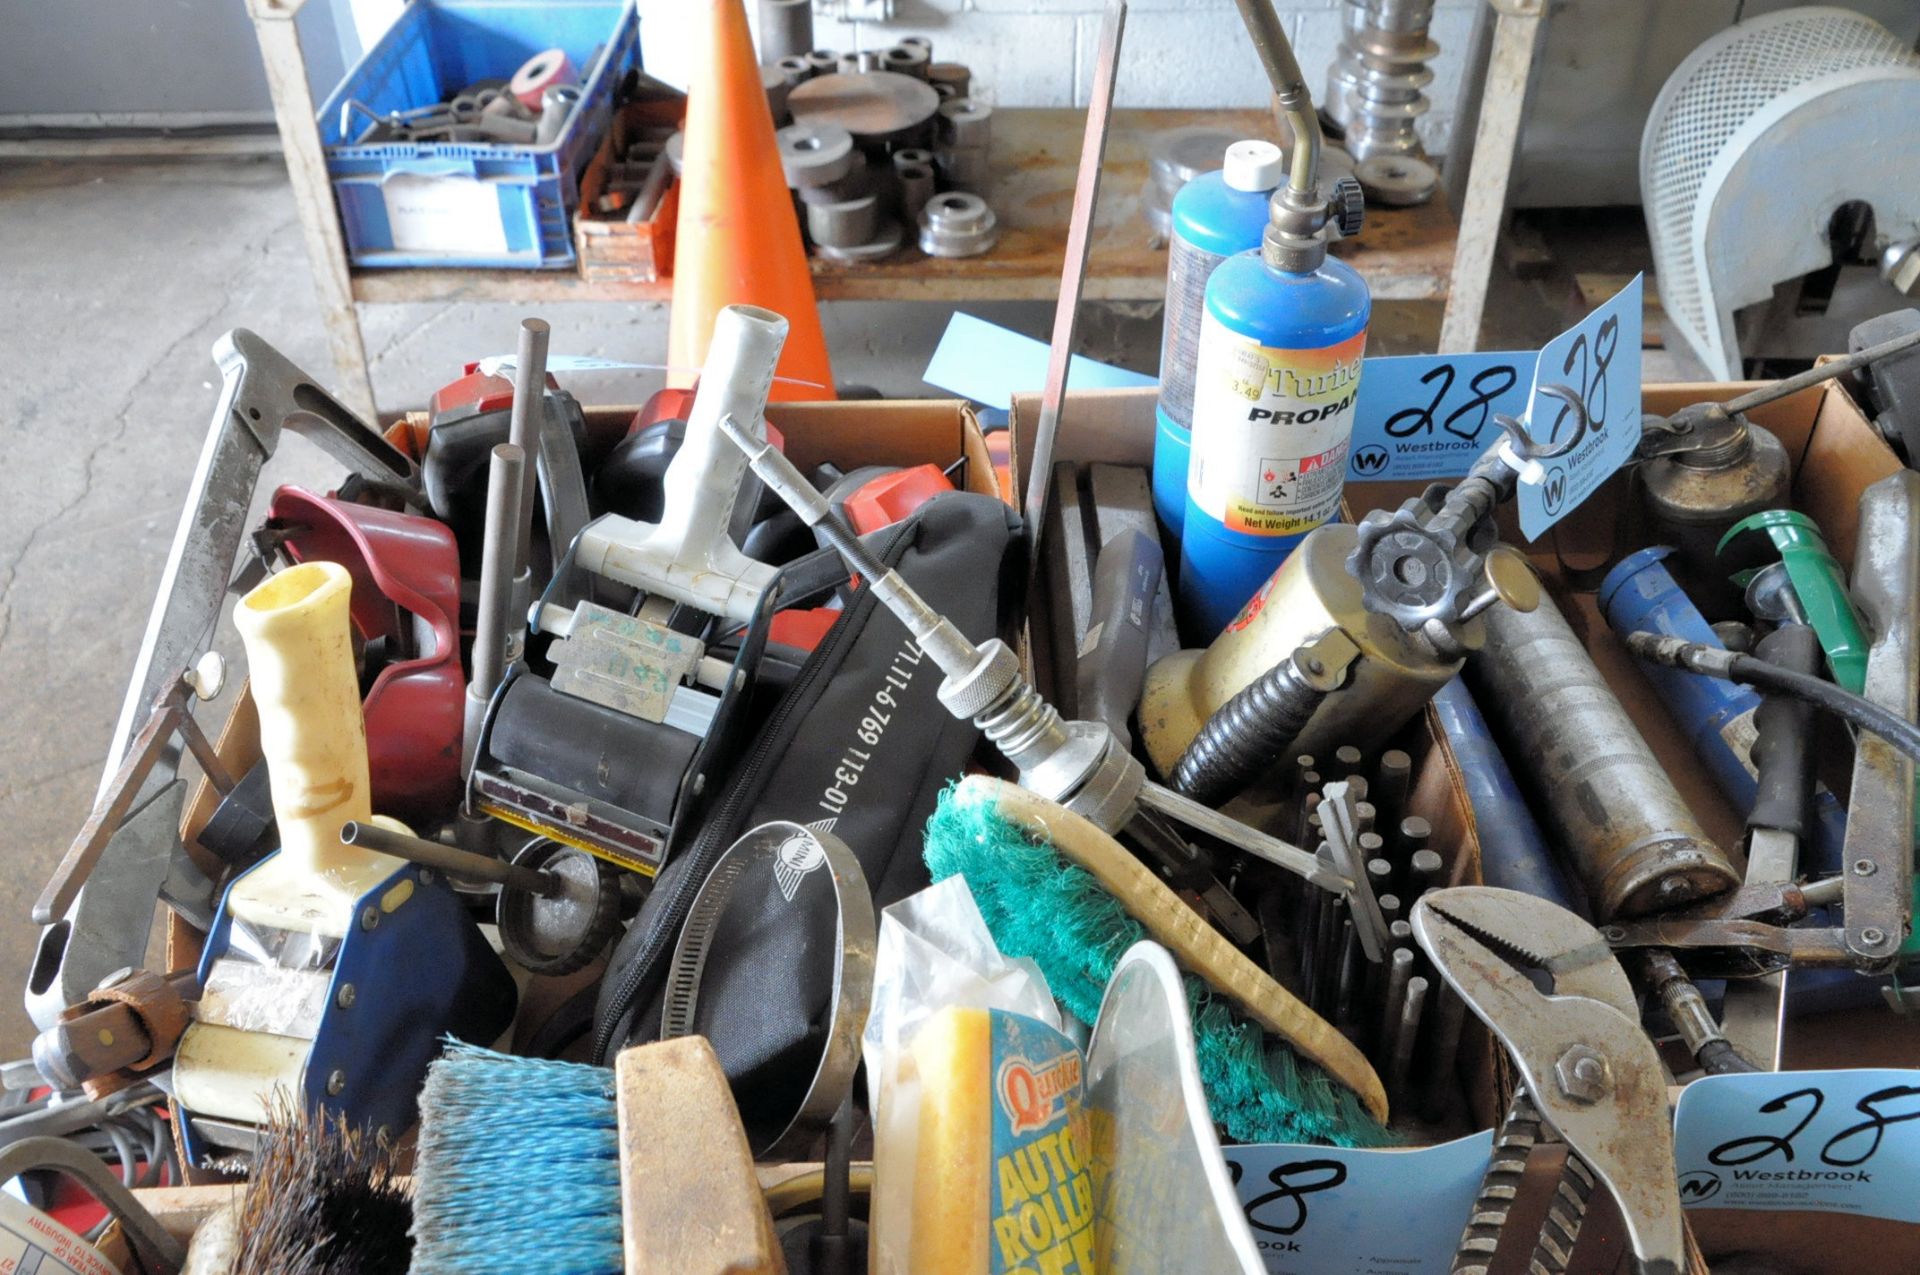 Lot-Screwdrivers, Pliers, Brushes, Grease Guns, Funnels, Tape Guns, Etc. in (12) Boxes - Image 2 of 6